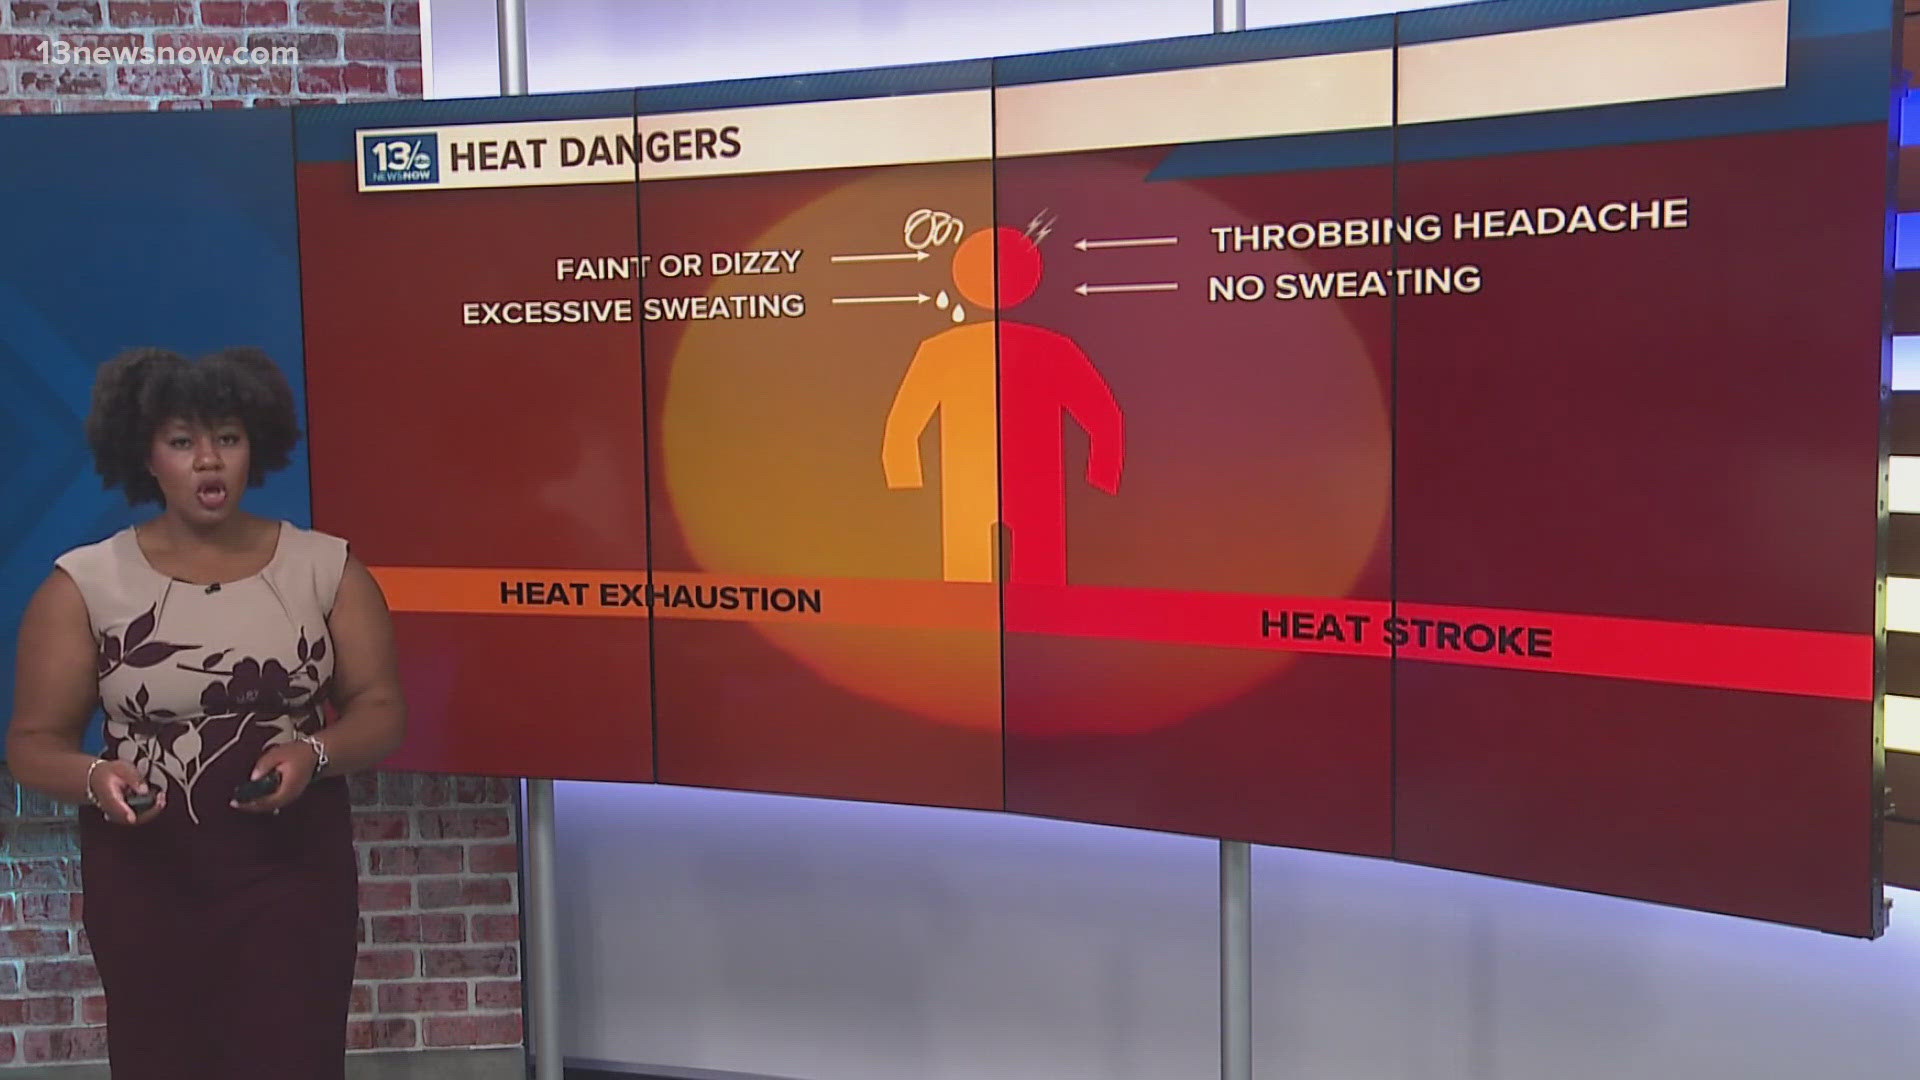 Meteorologist Taylor Stephenson talks about what to watch out for when it comes to heat exhaustion and heat stroke.